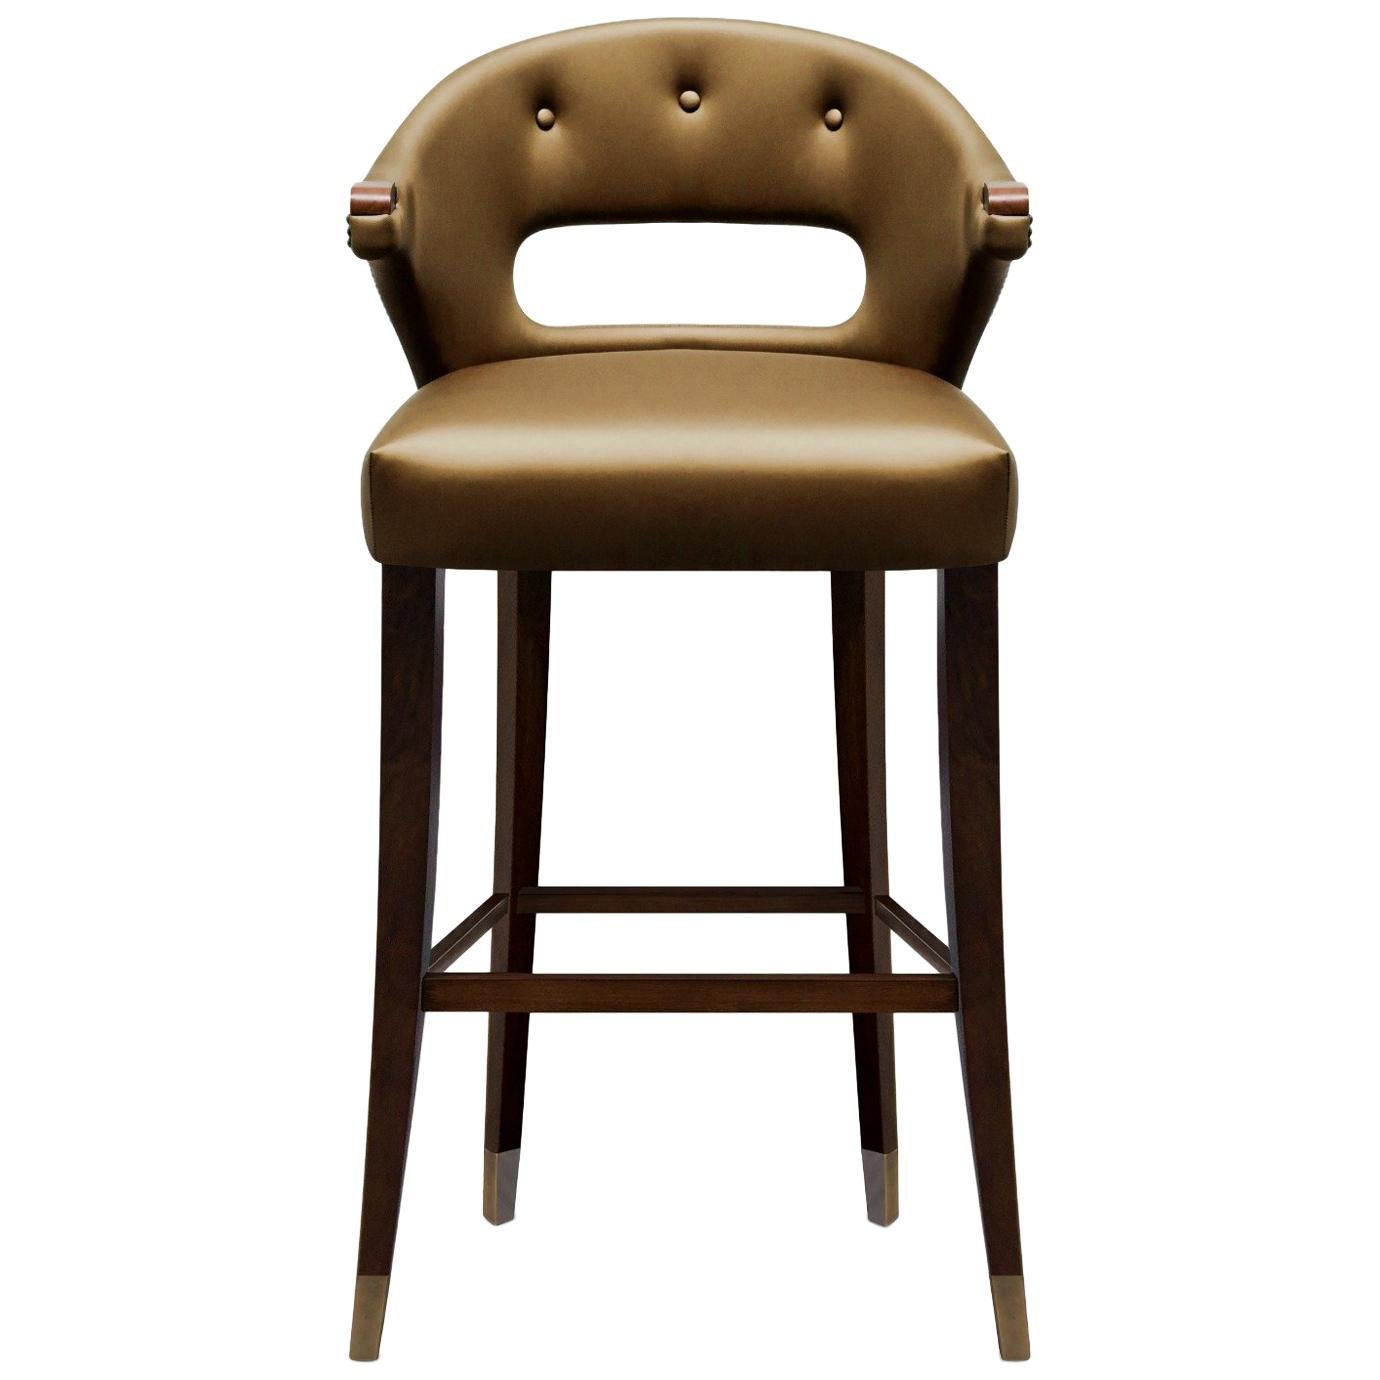 Nanook Counter Stool in Faux Leather And Bronze Renaissance Nails by Brabbu For Sale